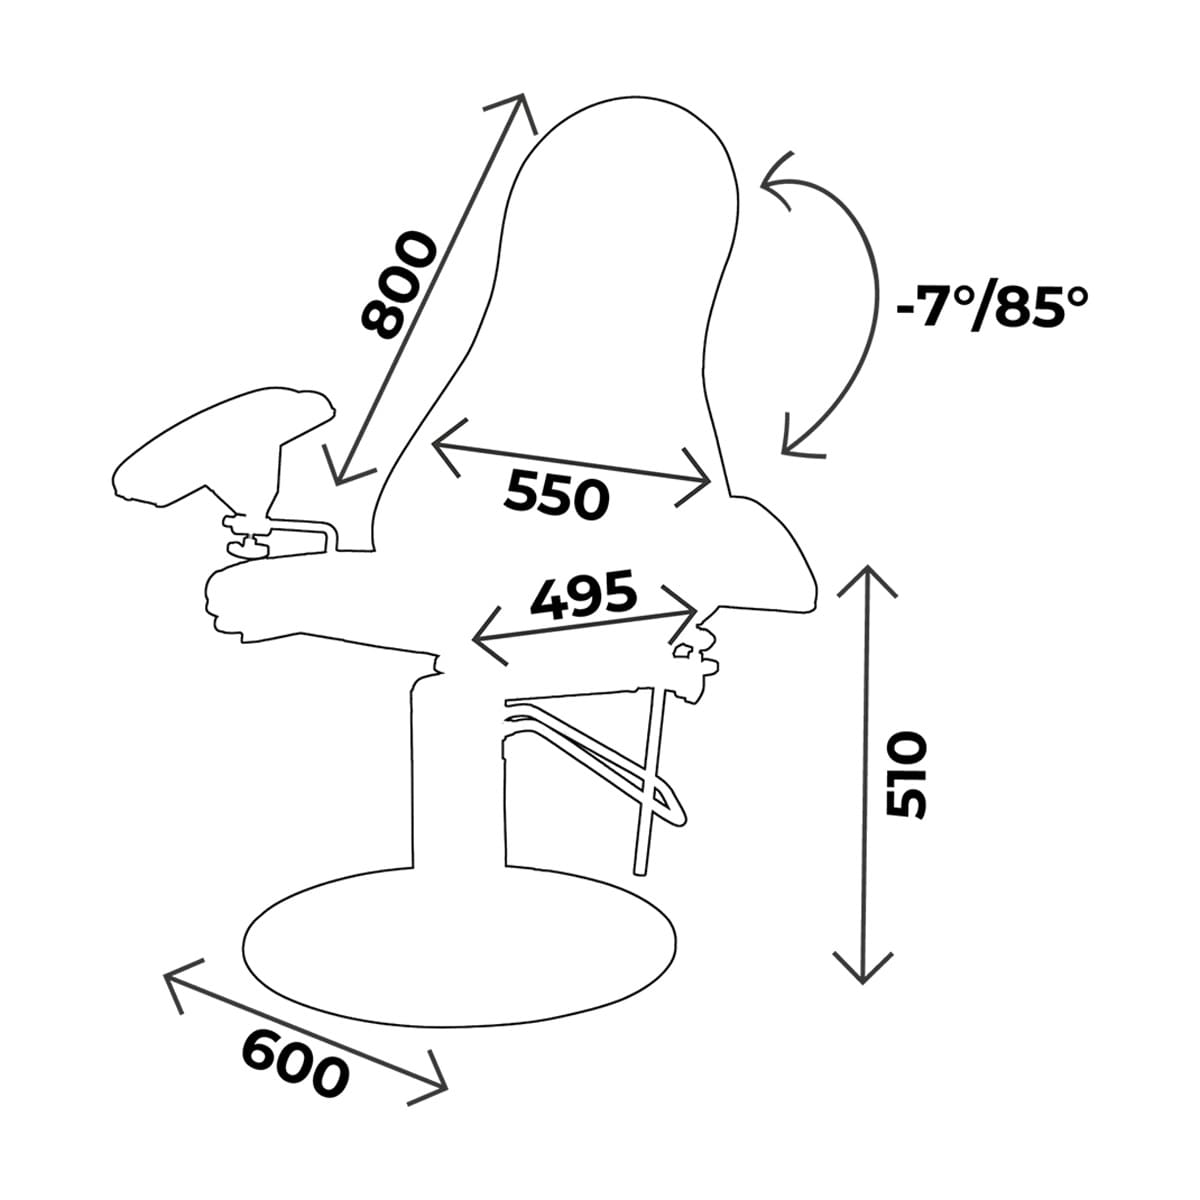 Blood chair height 51cm, 2 sections, non-rotative, with blood test splints